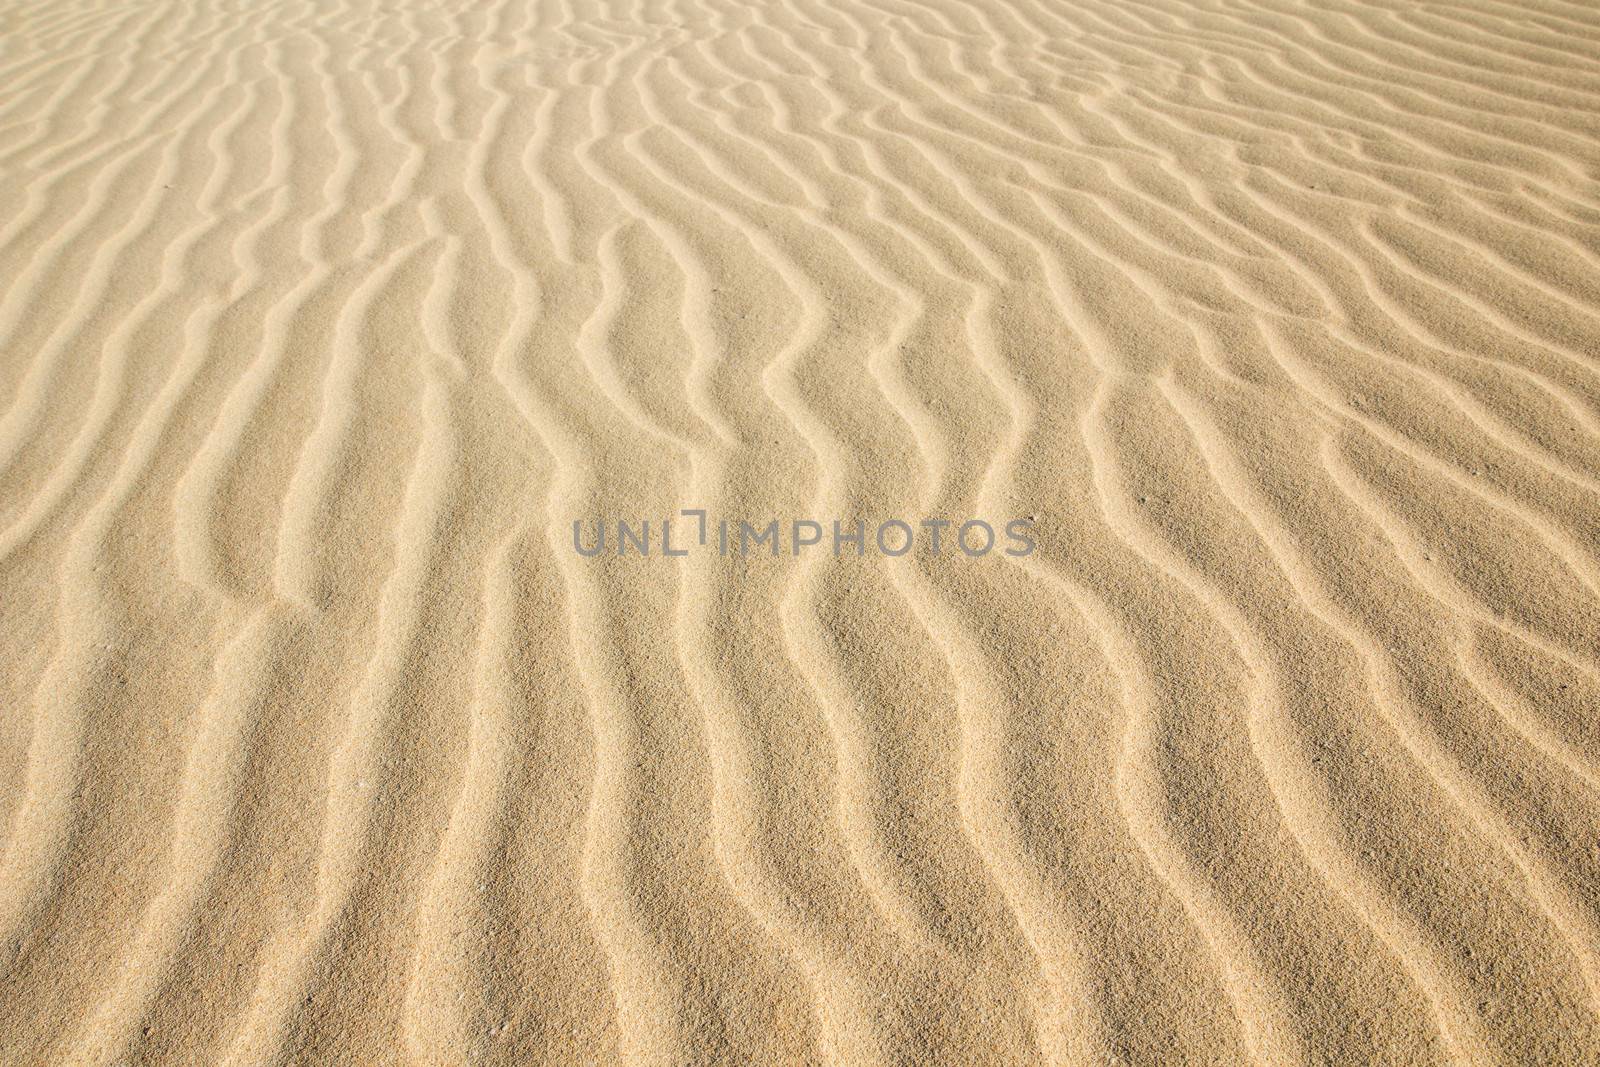 Desert sand pattern texture background from the sand in the Dunes of Corralejo in Fuerteventura, Canary Islands.